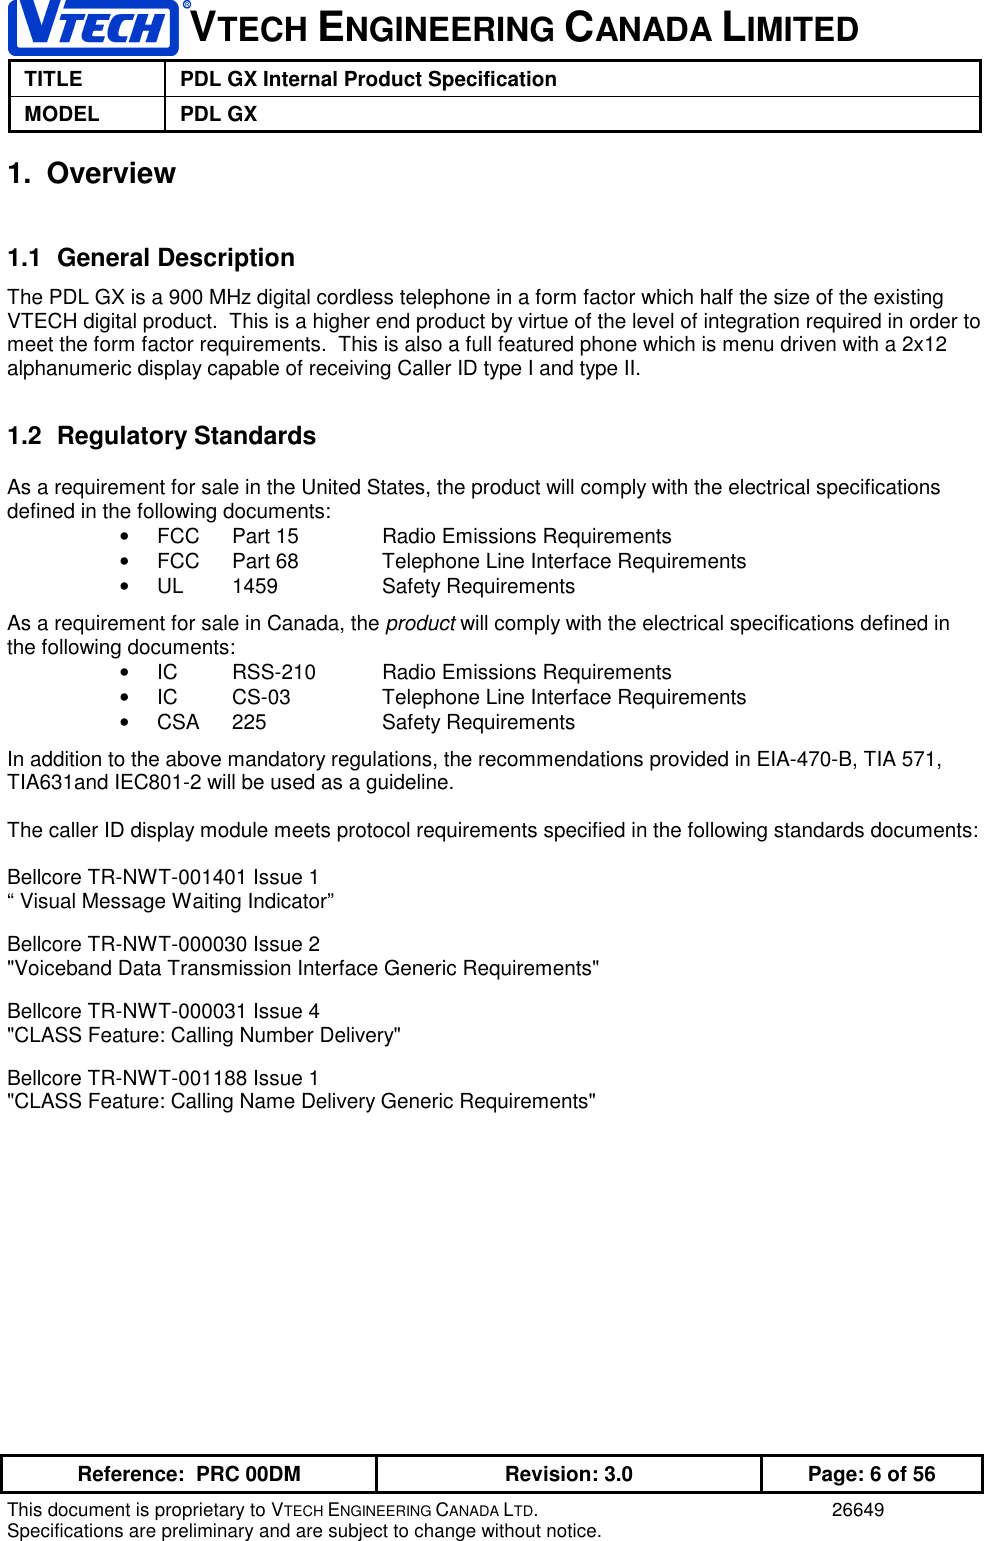 VTECH ENGINEERING CANADA LIMITEDTITLE PDL GX Internal Product SpecificationMODEL PDL GXReference:  PRC 00DM Revision: 3.0 Page: 6 of 56This document is proprietary to VTECH ENGINEERING CANADA LTD. 26649Specifications are preliminary and are subject to change without notice.1. Overview1.1 General DescriptionThe PDL GX is a 900 MHz digital cordless telephone in a form factor which half the size of the existingVTECH digital product.  This is a higher end product by virtue of the level of integration required in order tomeet the form factor requirements.  This is also a full featured phone which is menu driven with a 2x12alphanumeric display capable of receiving Caller ID type I and type II.1.2 Regulatory StandardsAs a requirement for sale in the United States, the product will comply with the electrical specificationsdefined in the following documents:•  FCC Part 15 Radio Emissions Requirements•  FCC Part 68 Telephone Line Interface Requirements• UL 1459 Safety RequirementsAs a requirement for sale in Canada, the product will comply with the electrical specifications defined inthe following documents:•  IC RSS-210 Radio Emissions Requirements•  IC CS-03 Telephone Line Interface Requirements• CSA 225 Safety RequirementsIn addition to the above mandatory regulations, the recommendations provided in EIA-470-B, TIA 571,TIA631and IEC801-2 will be used as a guideline.The caller ID display module meets protocol requirements specified in the following standards documents:Bellcore TR-NWT-001401 Issue 1“ Visual Message Waiting Indicator”Bellcore TR-NWT-000030 Issue 2&quot;Voiceband Data Transmission Interface Generic Requirements&quot;Bellcore TR-NWT-000031 Issue 4&quot;CLASS Feature: Calling Number Delivery&quot;Bellcore TR-NWT-001188 Issue 1&quot;CLASS Feature: Calling Name Delivery Generic Requirements&quot;